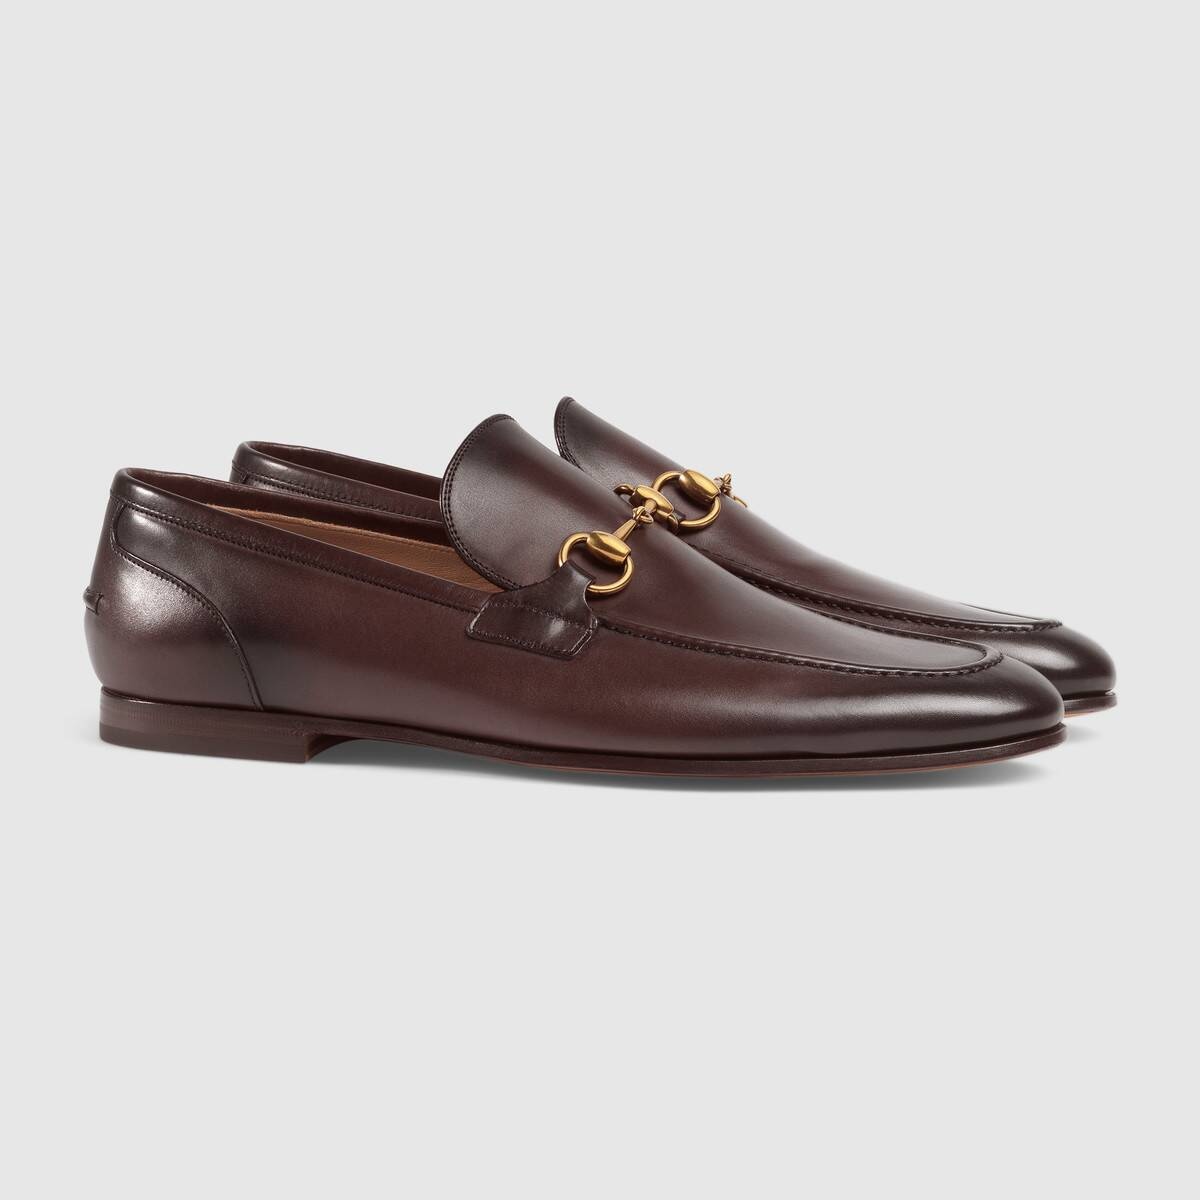 Gucci Jordaan leather loafer - 2